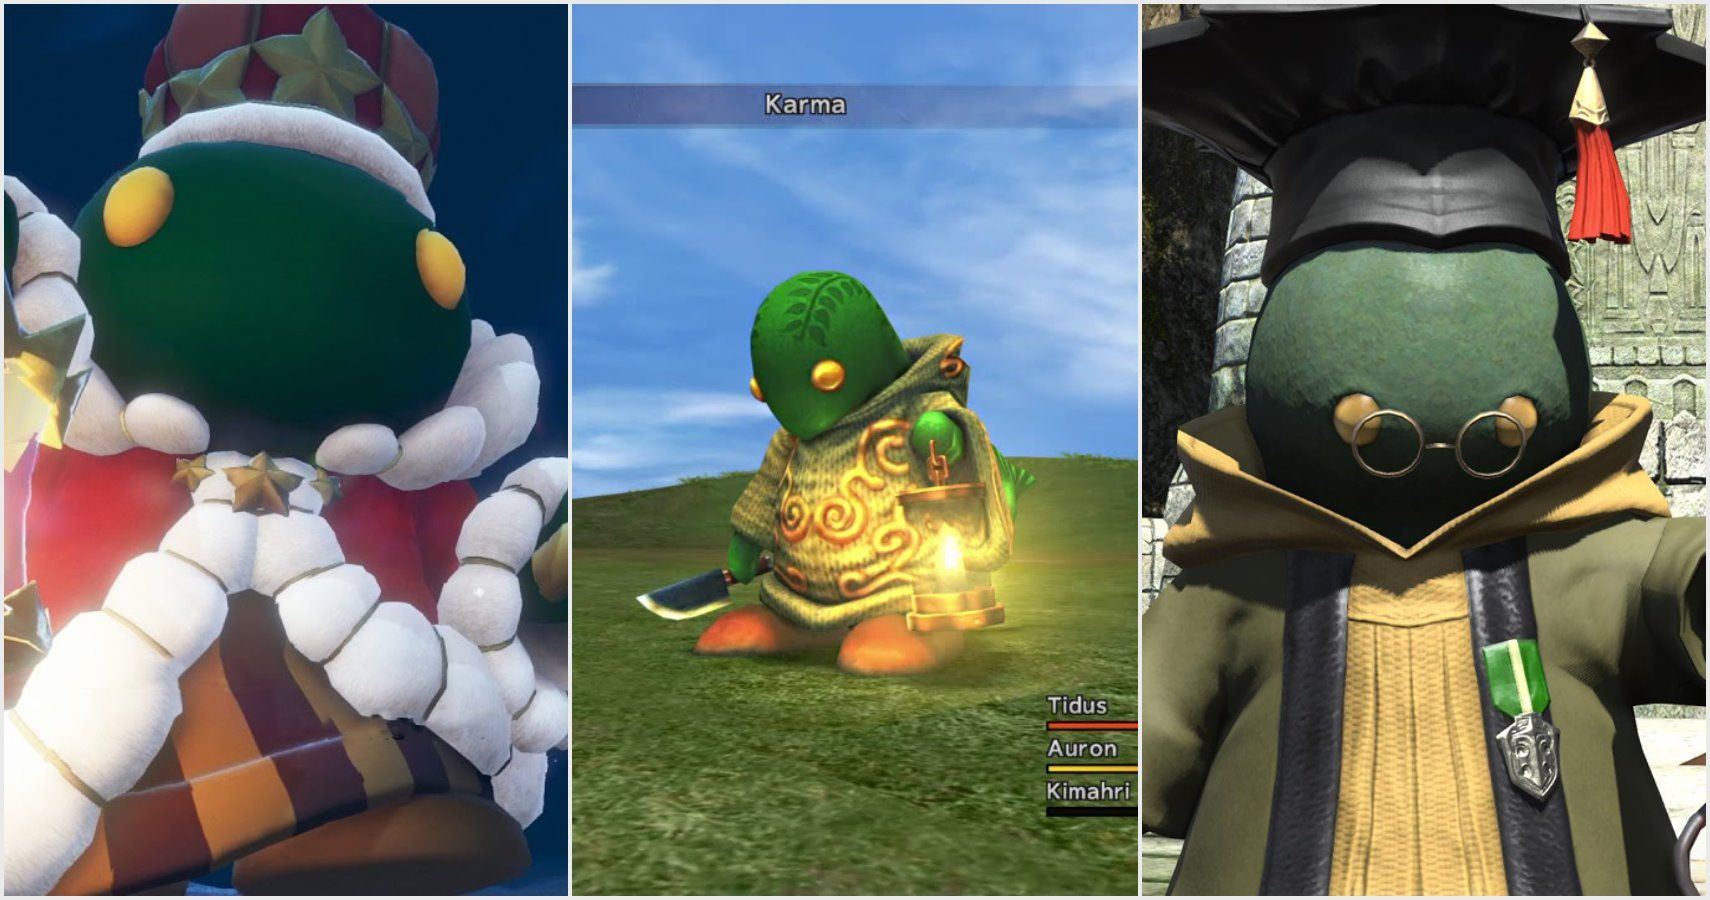 Final Fantasy: 10 Awesome Facts & Trivia You Didn't Know About The Tonberry